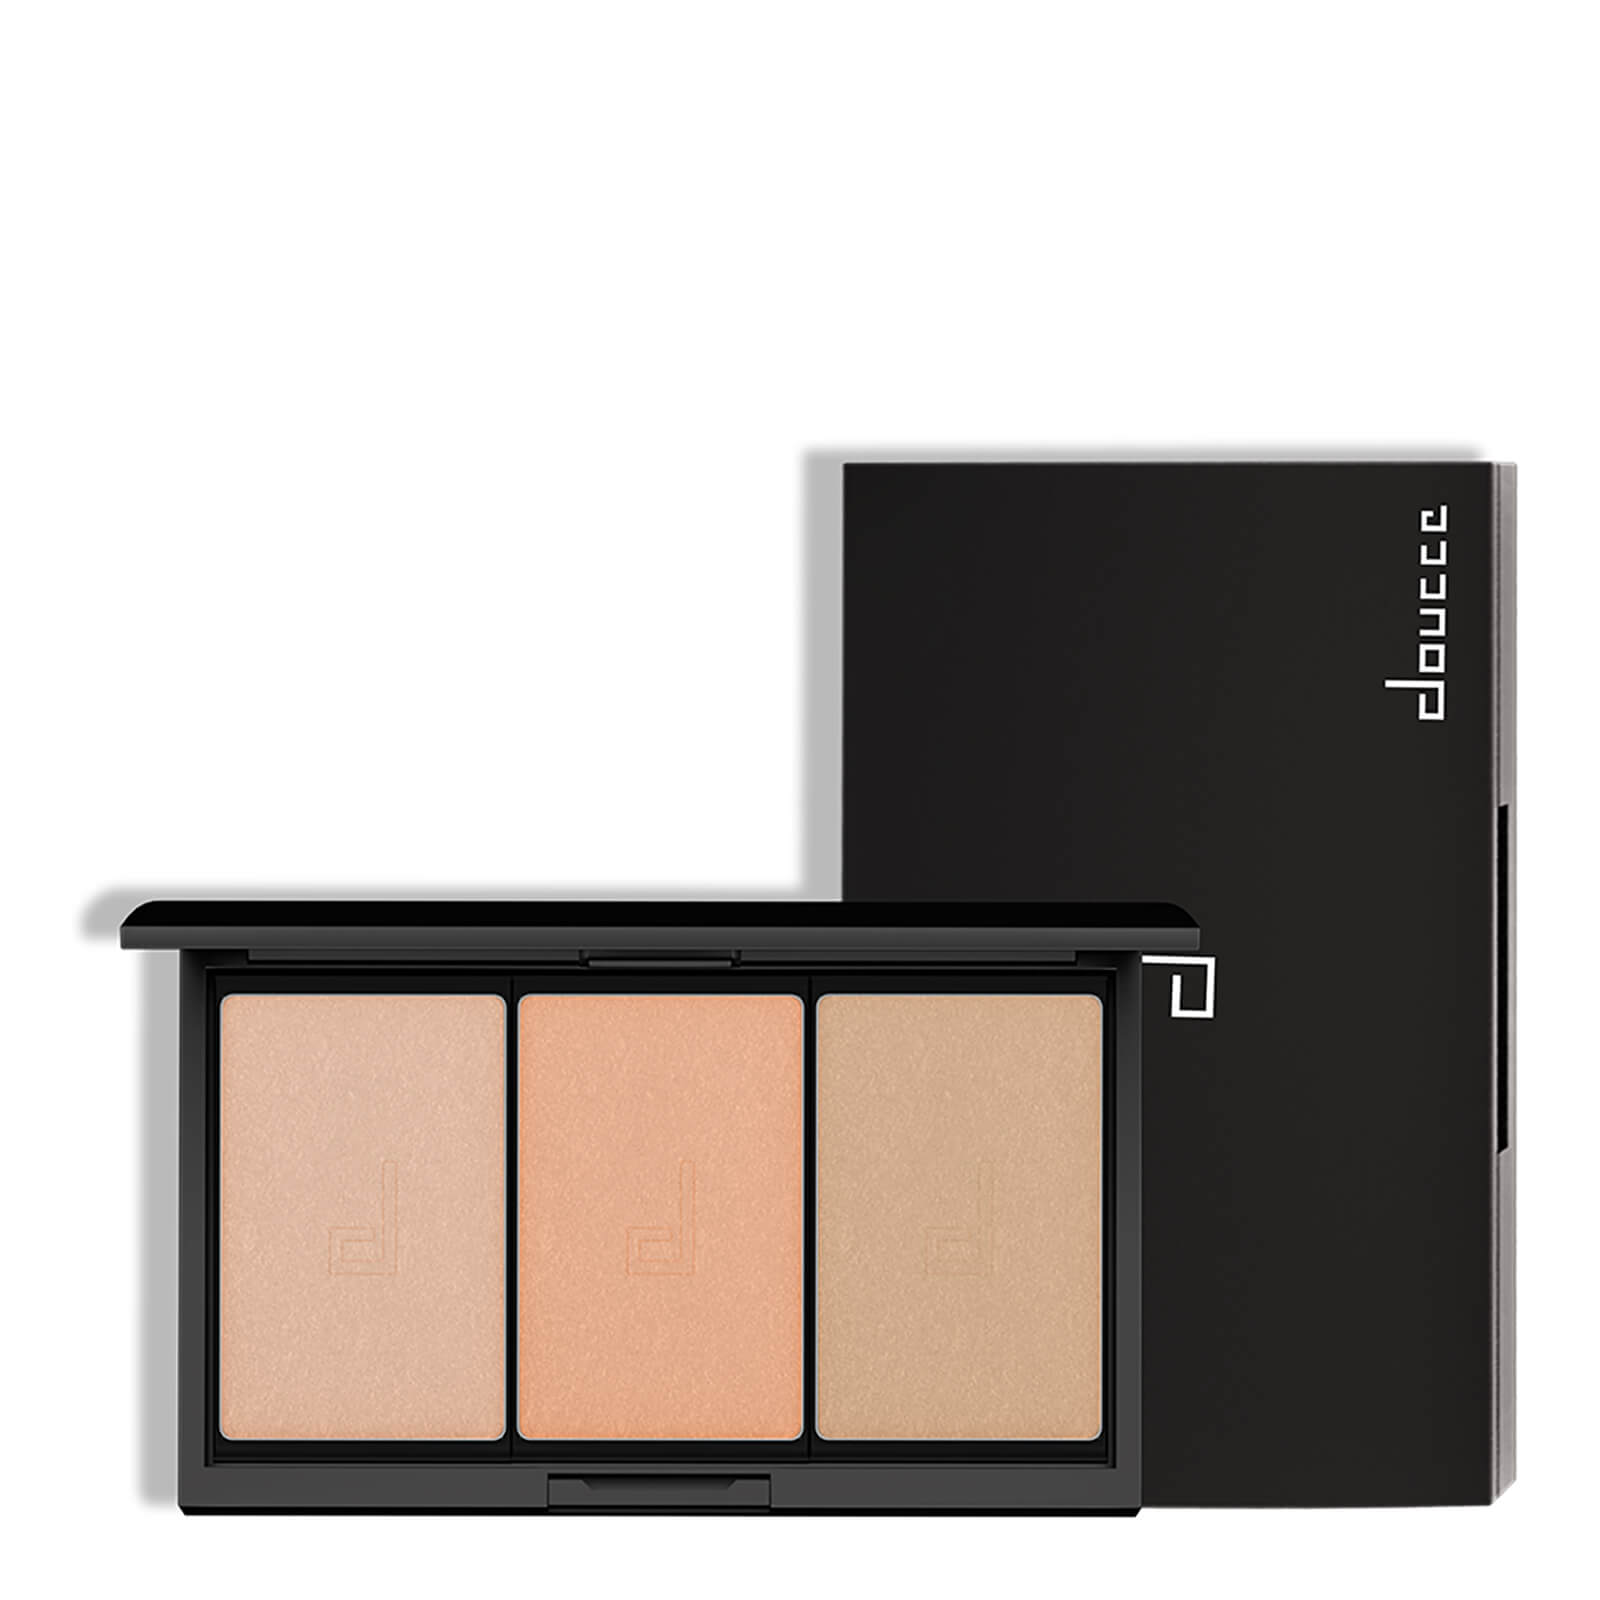 doucce Freematic Highlighter Pro Palette - Glow Effect (3) 6.8g